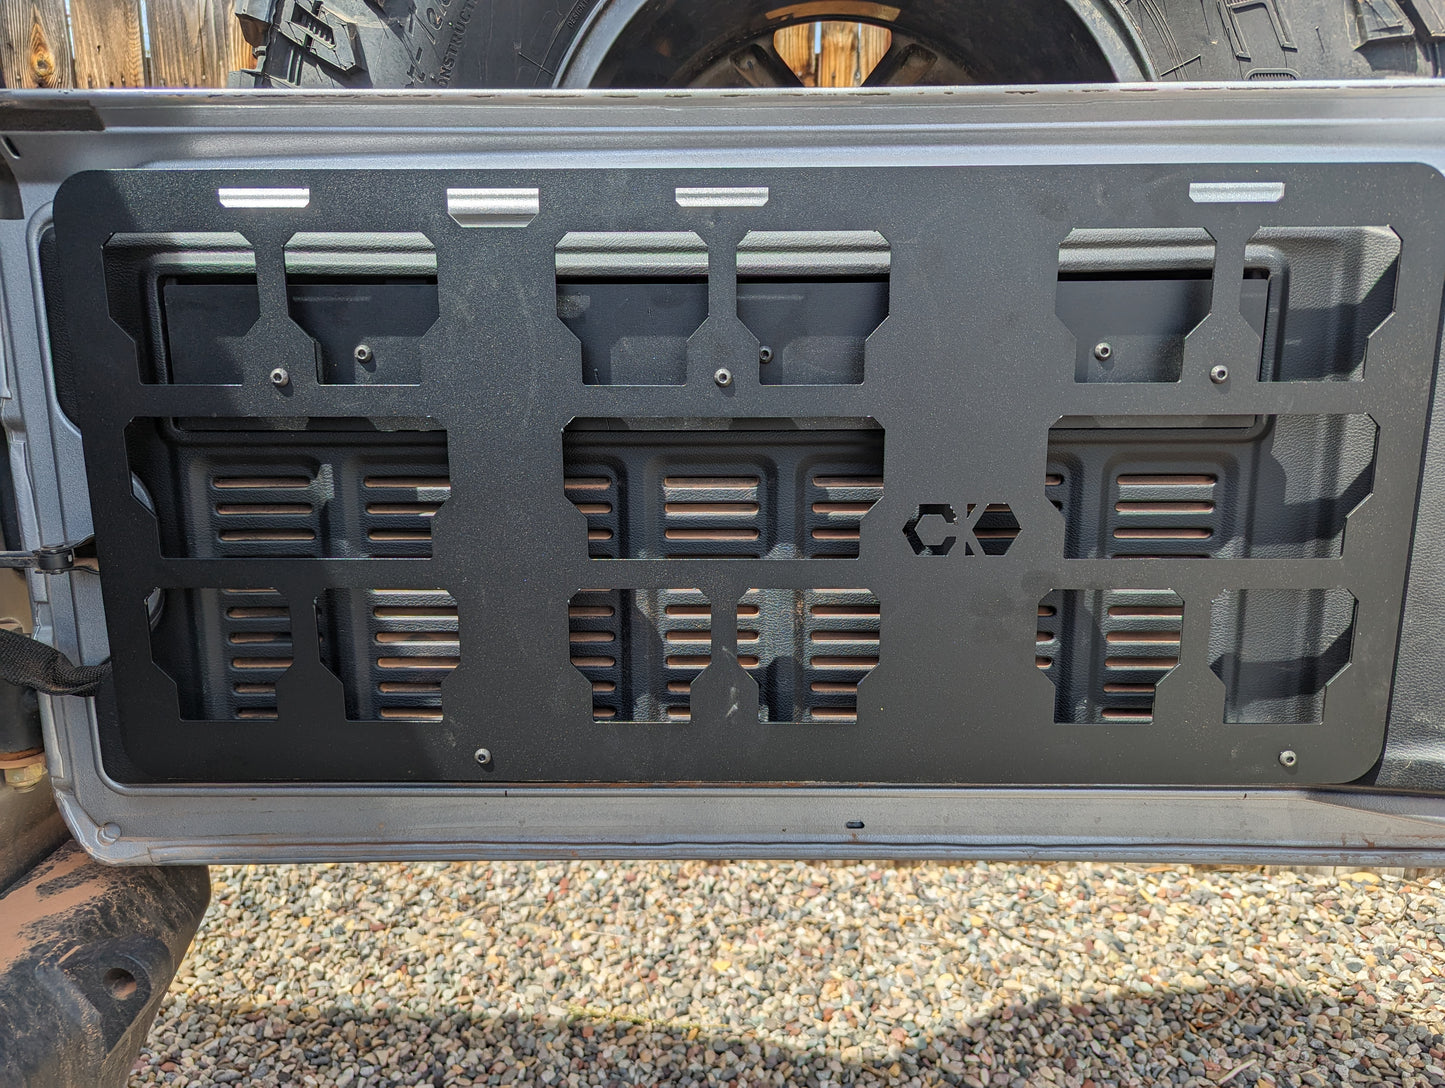 Tailgate PACKOUT mount for Jeep Wrangler JL